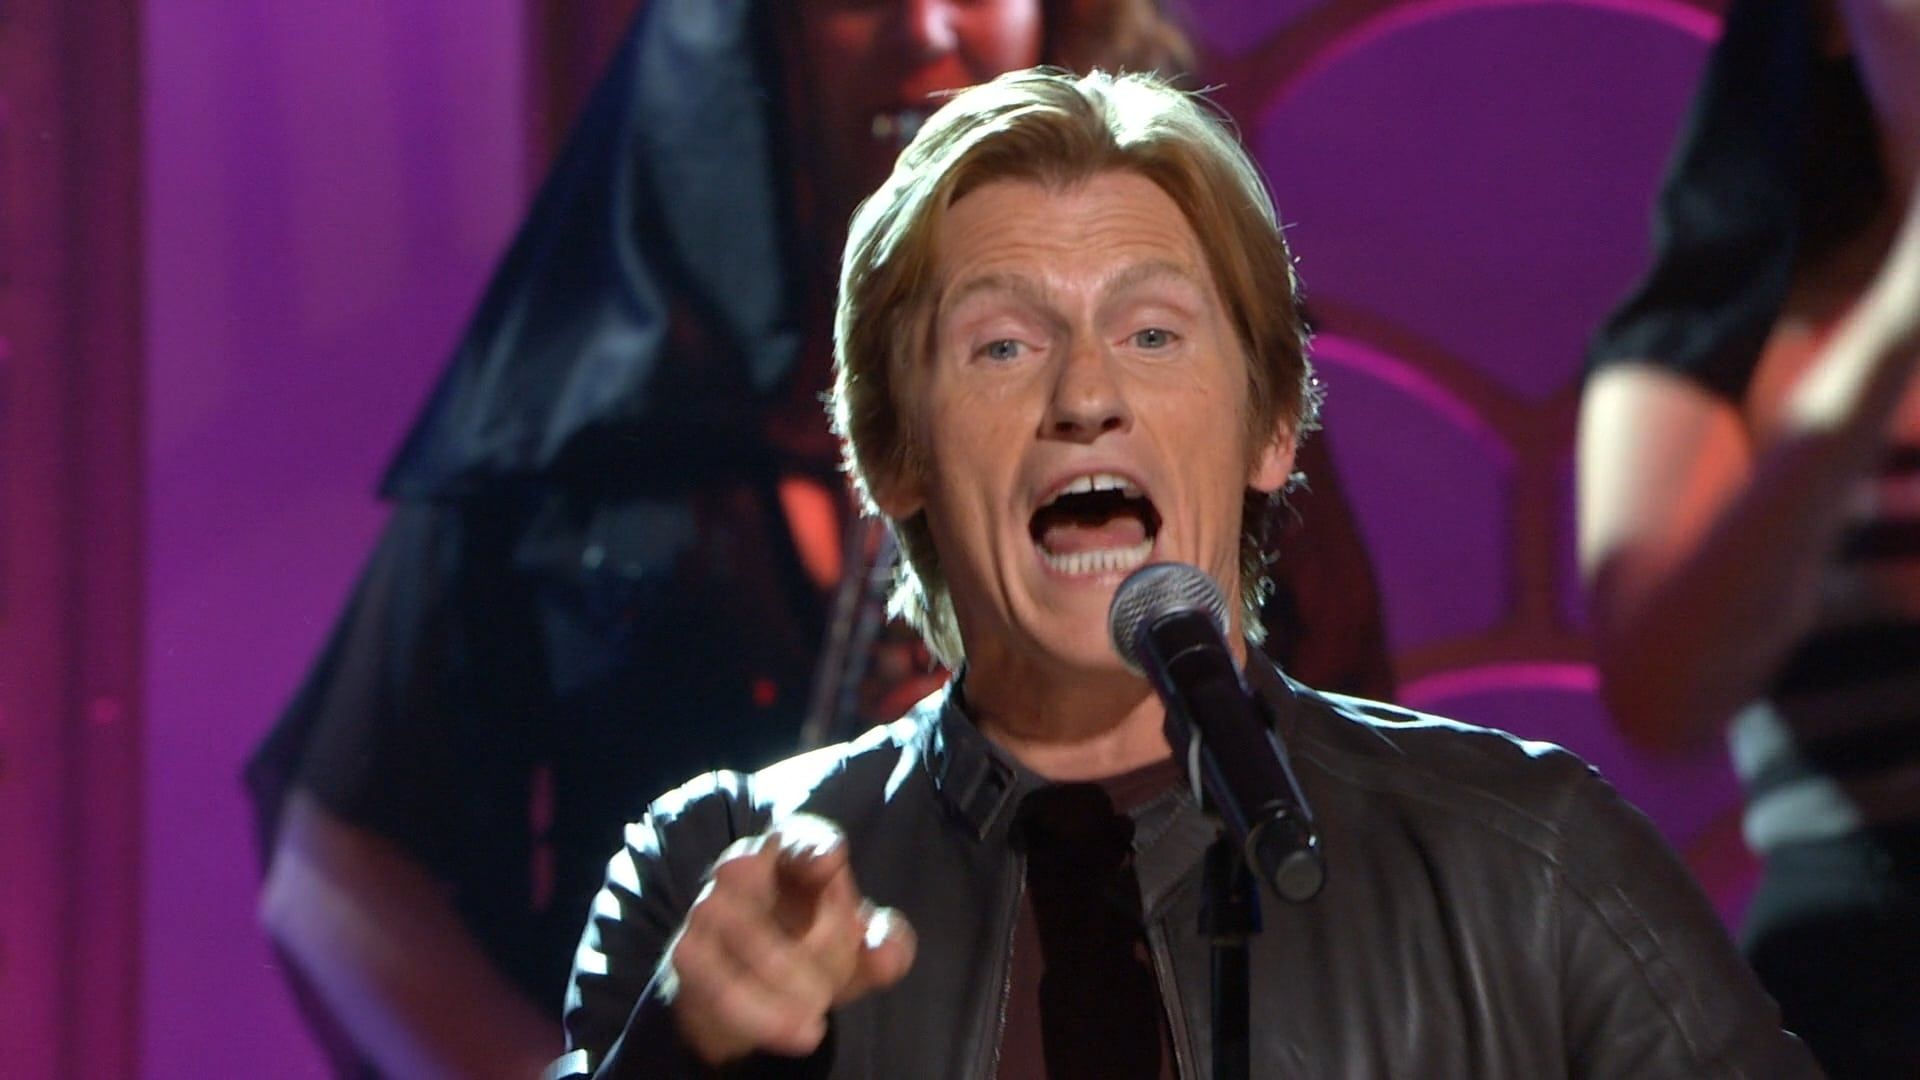 Denis Leary & Friends Presents: Douchbags & Donuts background